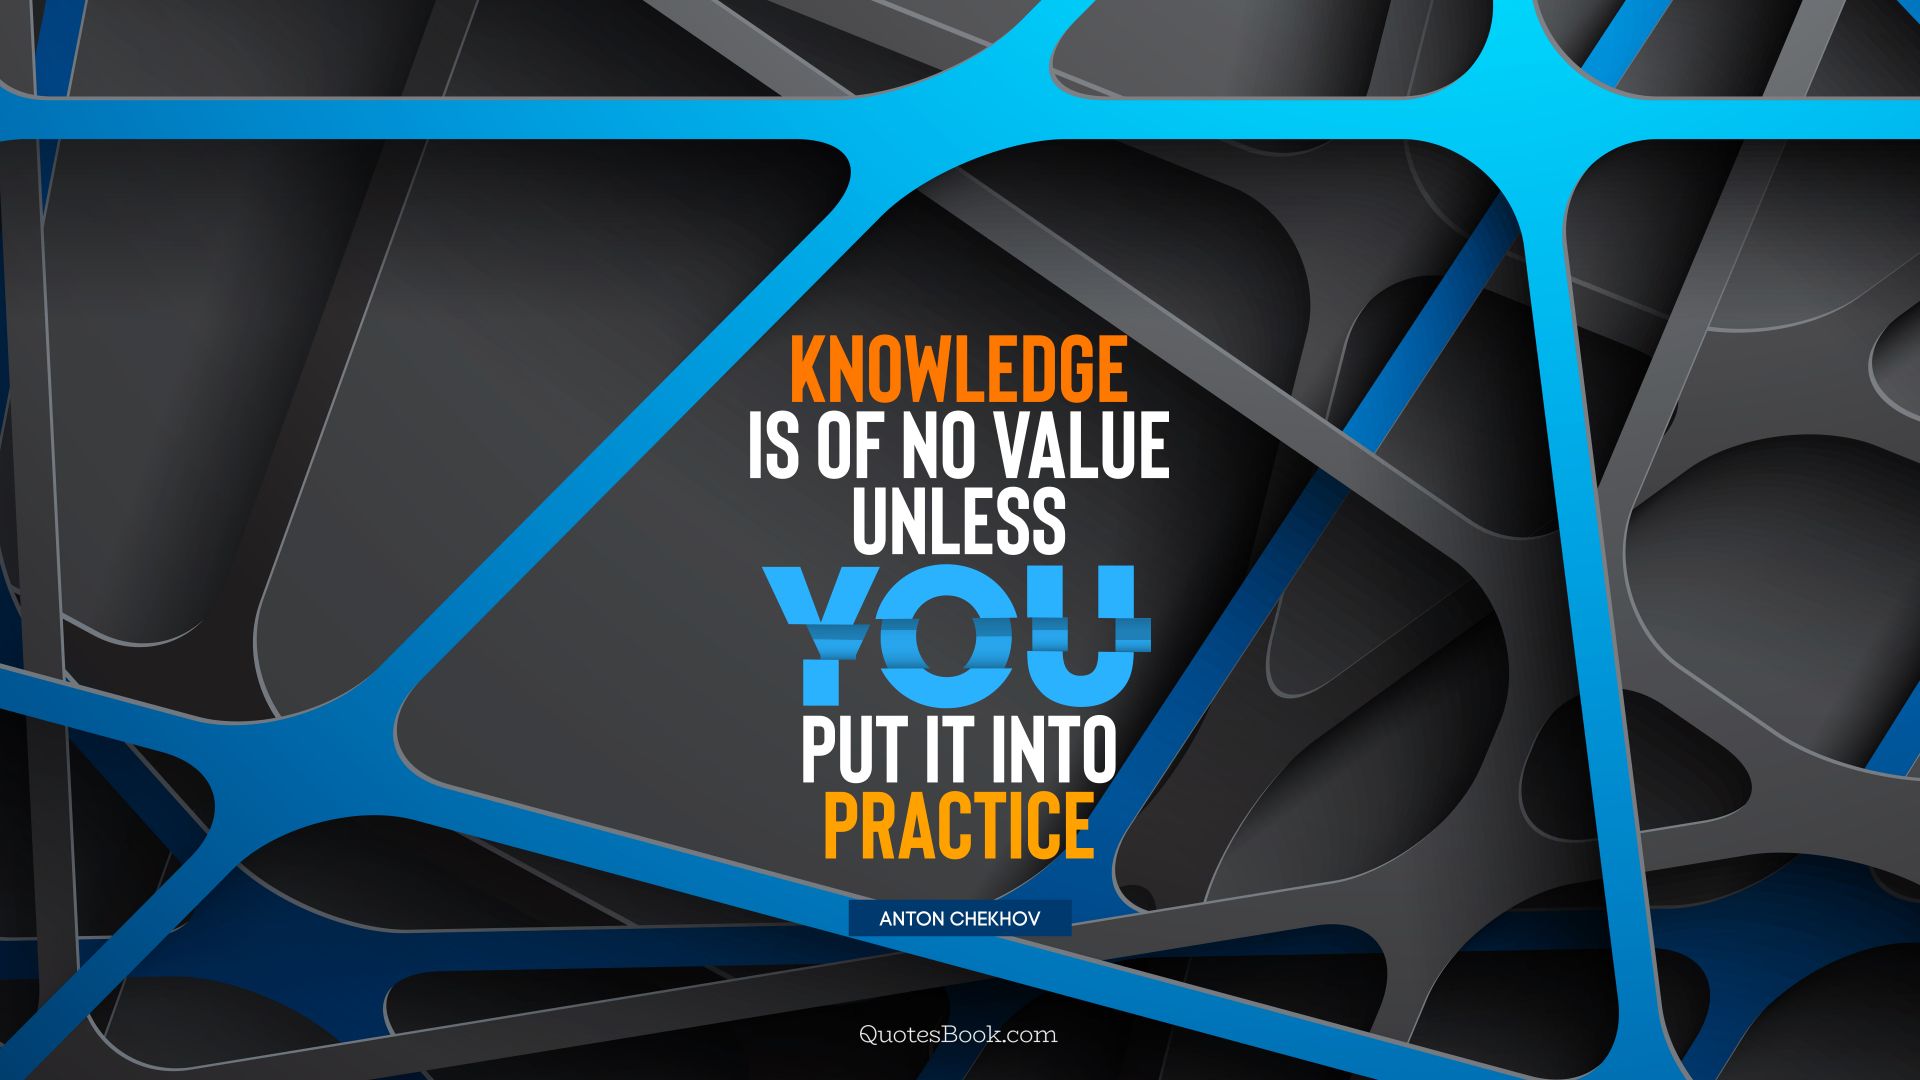 Knowledge is of no value unless you put it into practice. - Quote by Anton Chekhov